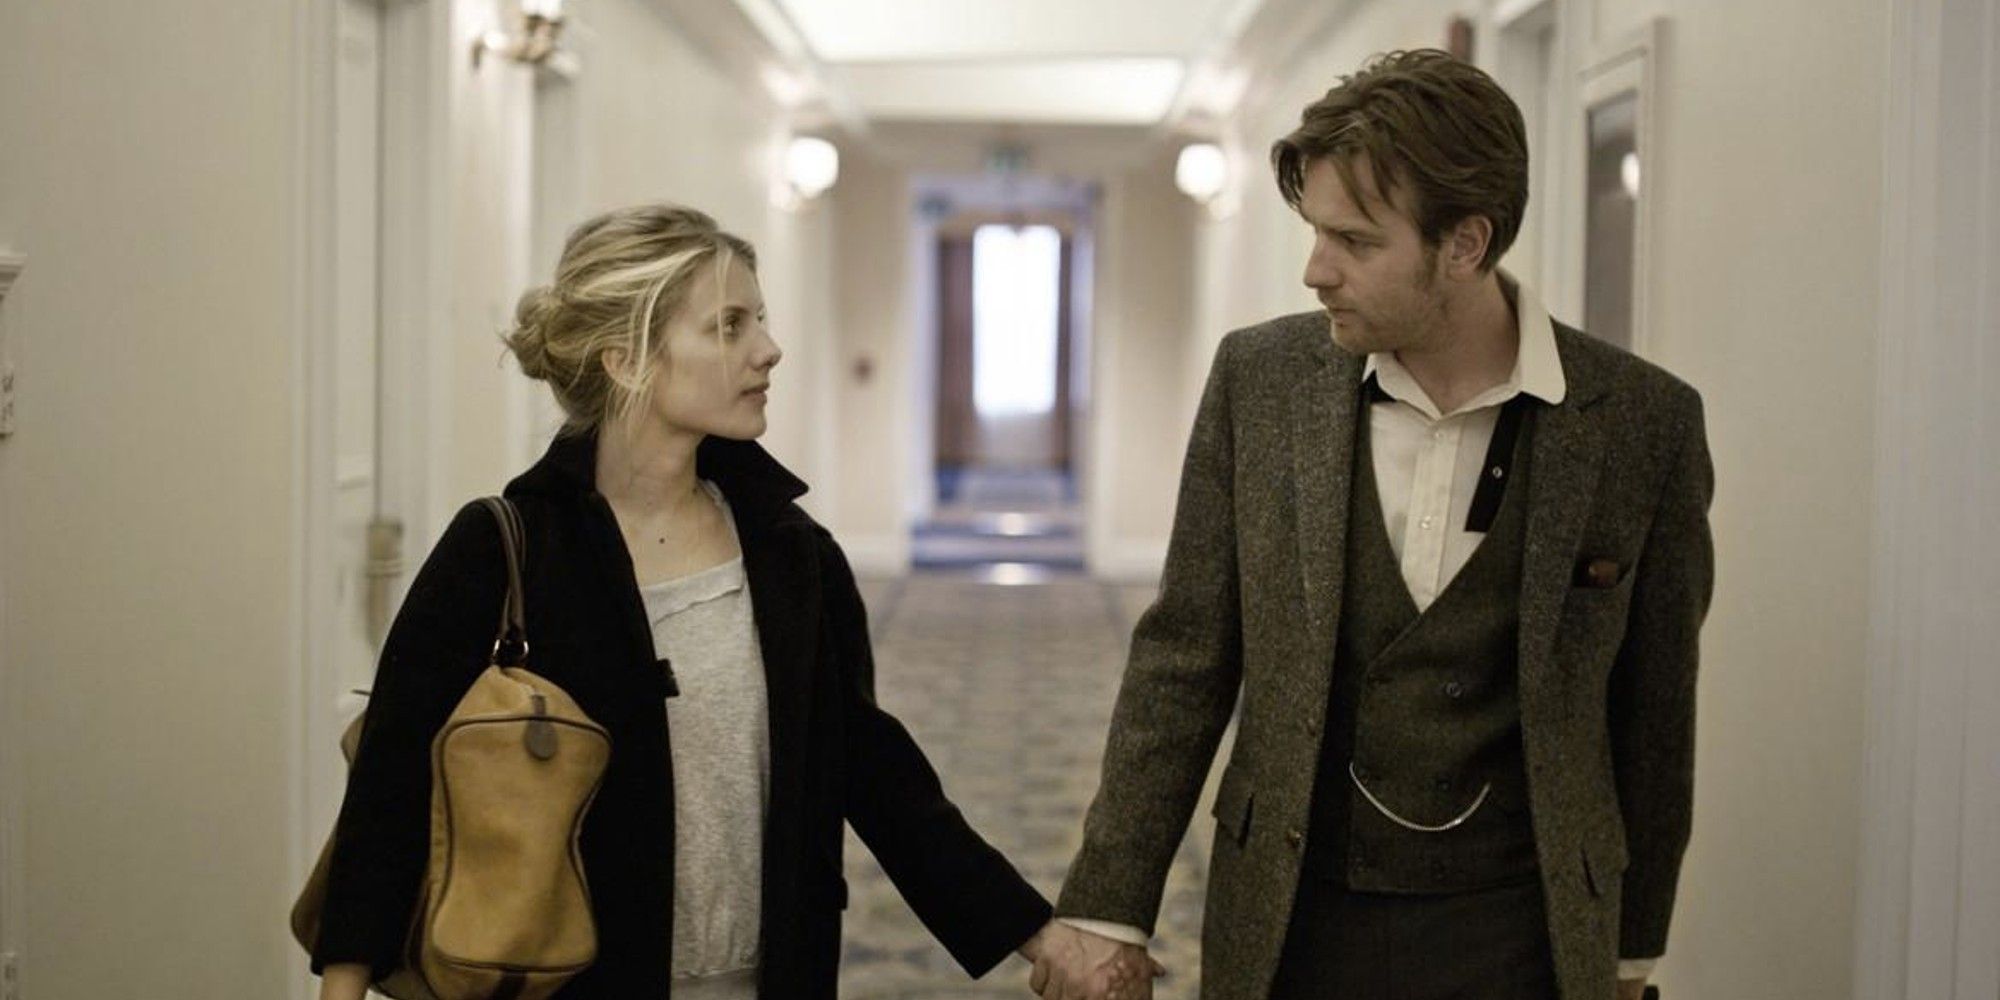 Ewan McGregor and  Mélanie Laurent in 'Beginners' looking at each other while holding hands.